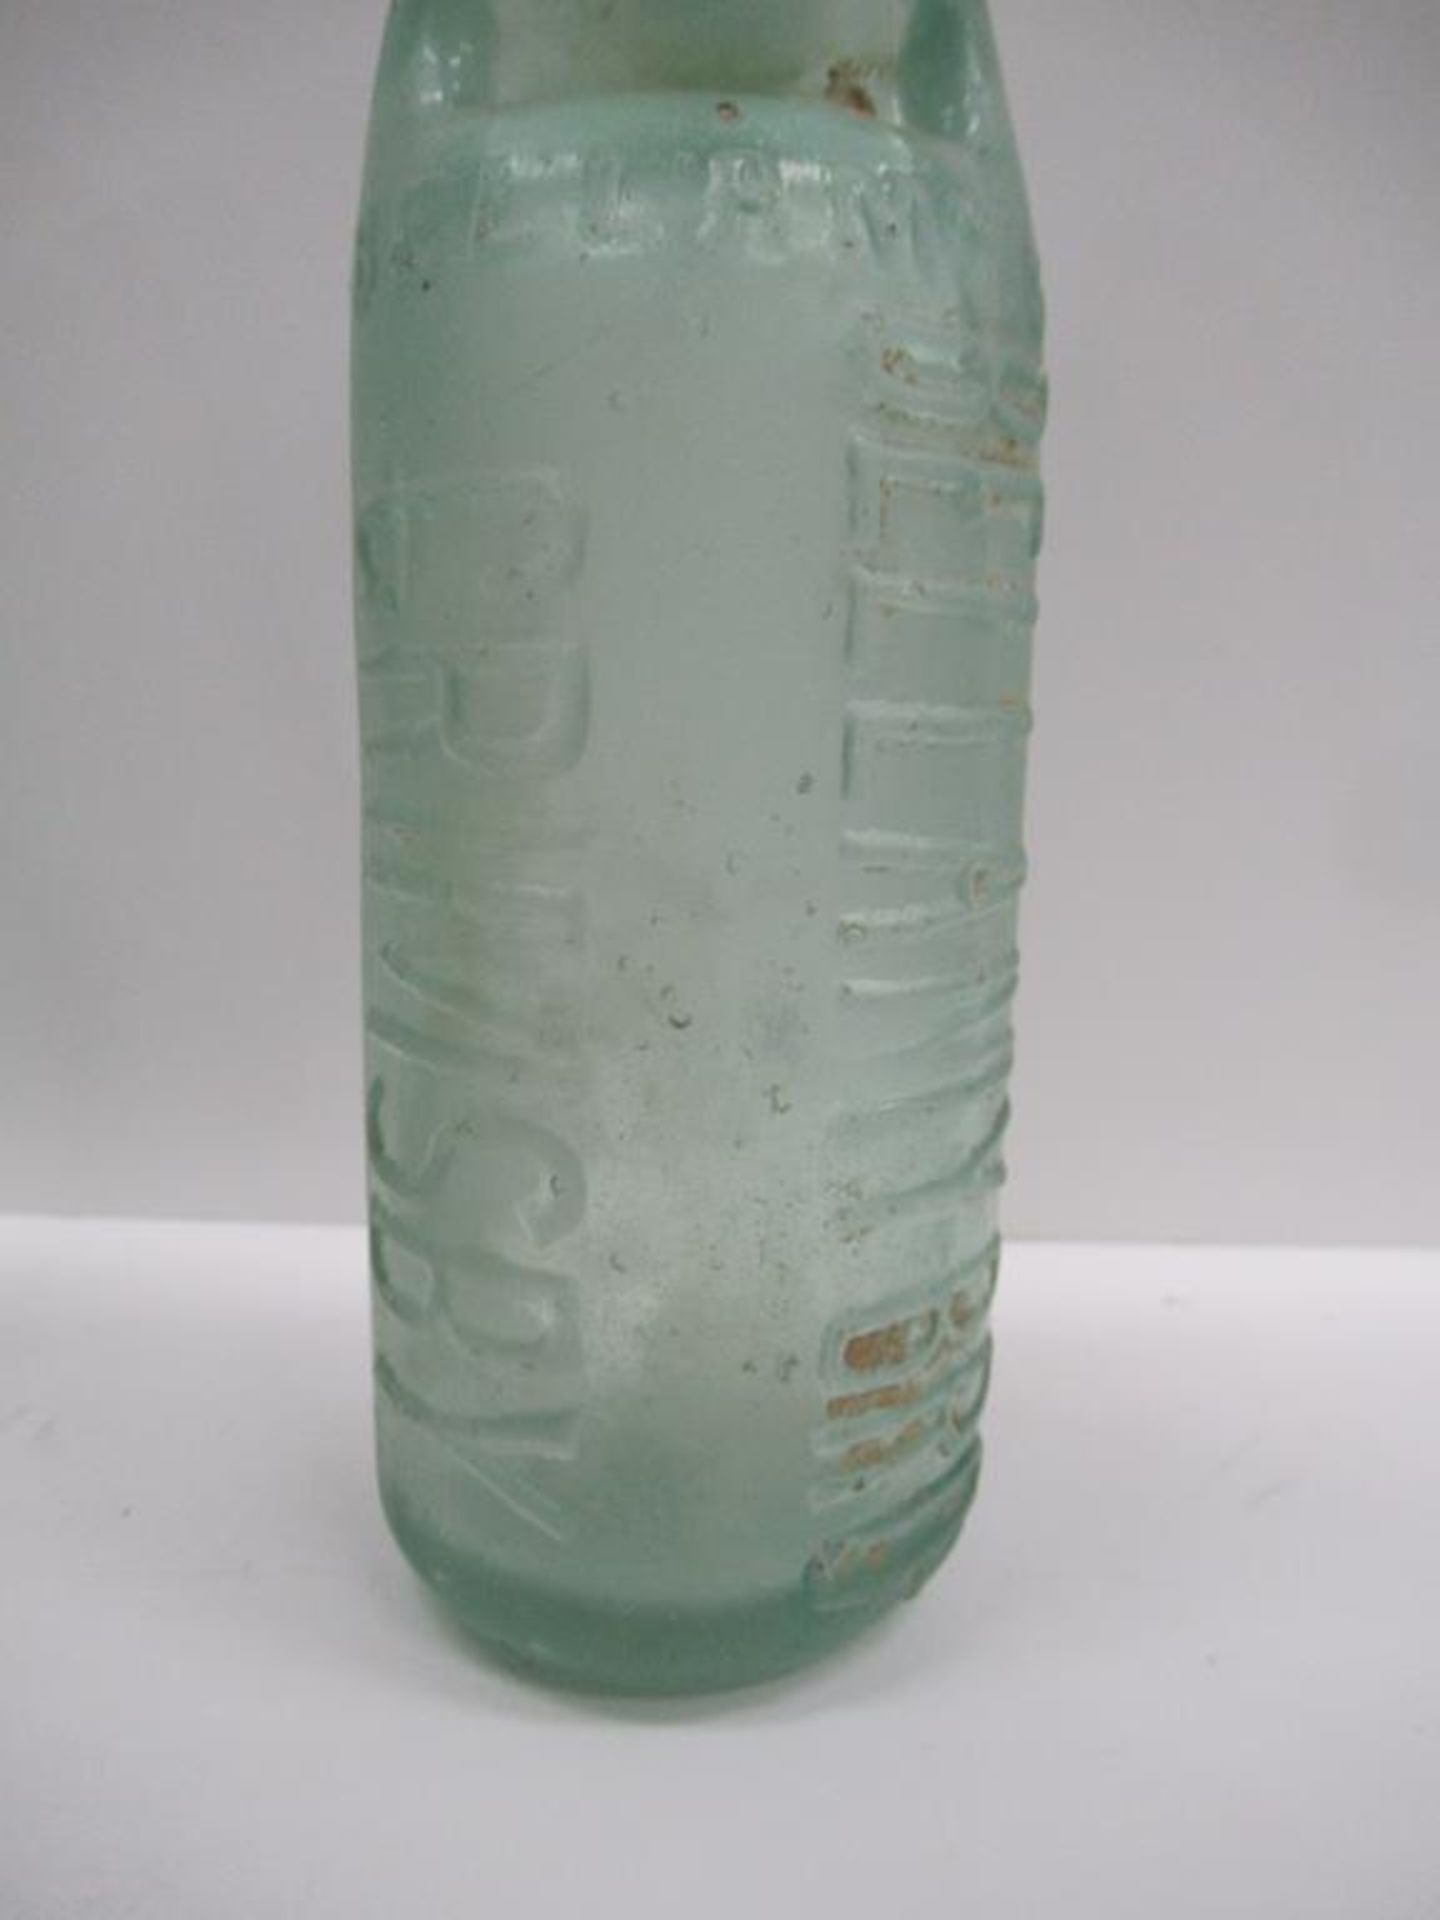 7x Grimsby (3x Grimsby & Louth) Bellamy Bro's Codd bottles - Image 8 of 23